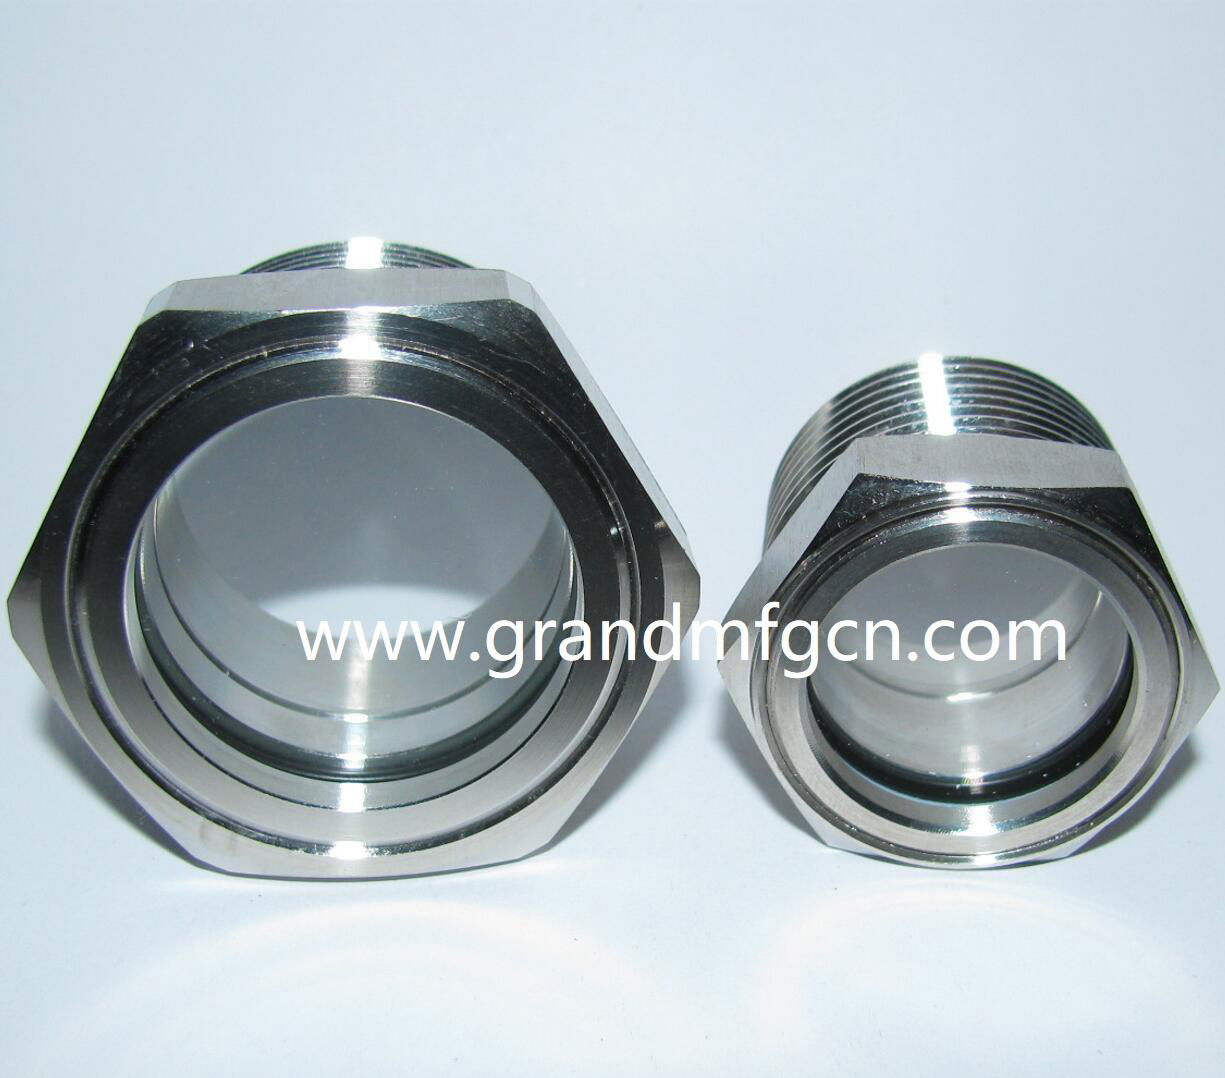 STAINLESS STEEL SS316 NPT OIL SIGHT GLASS